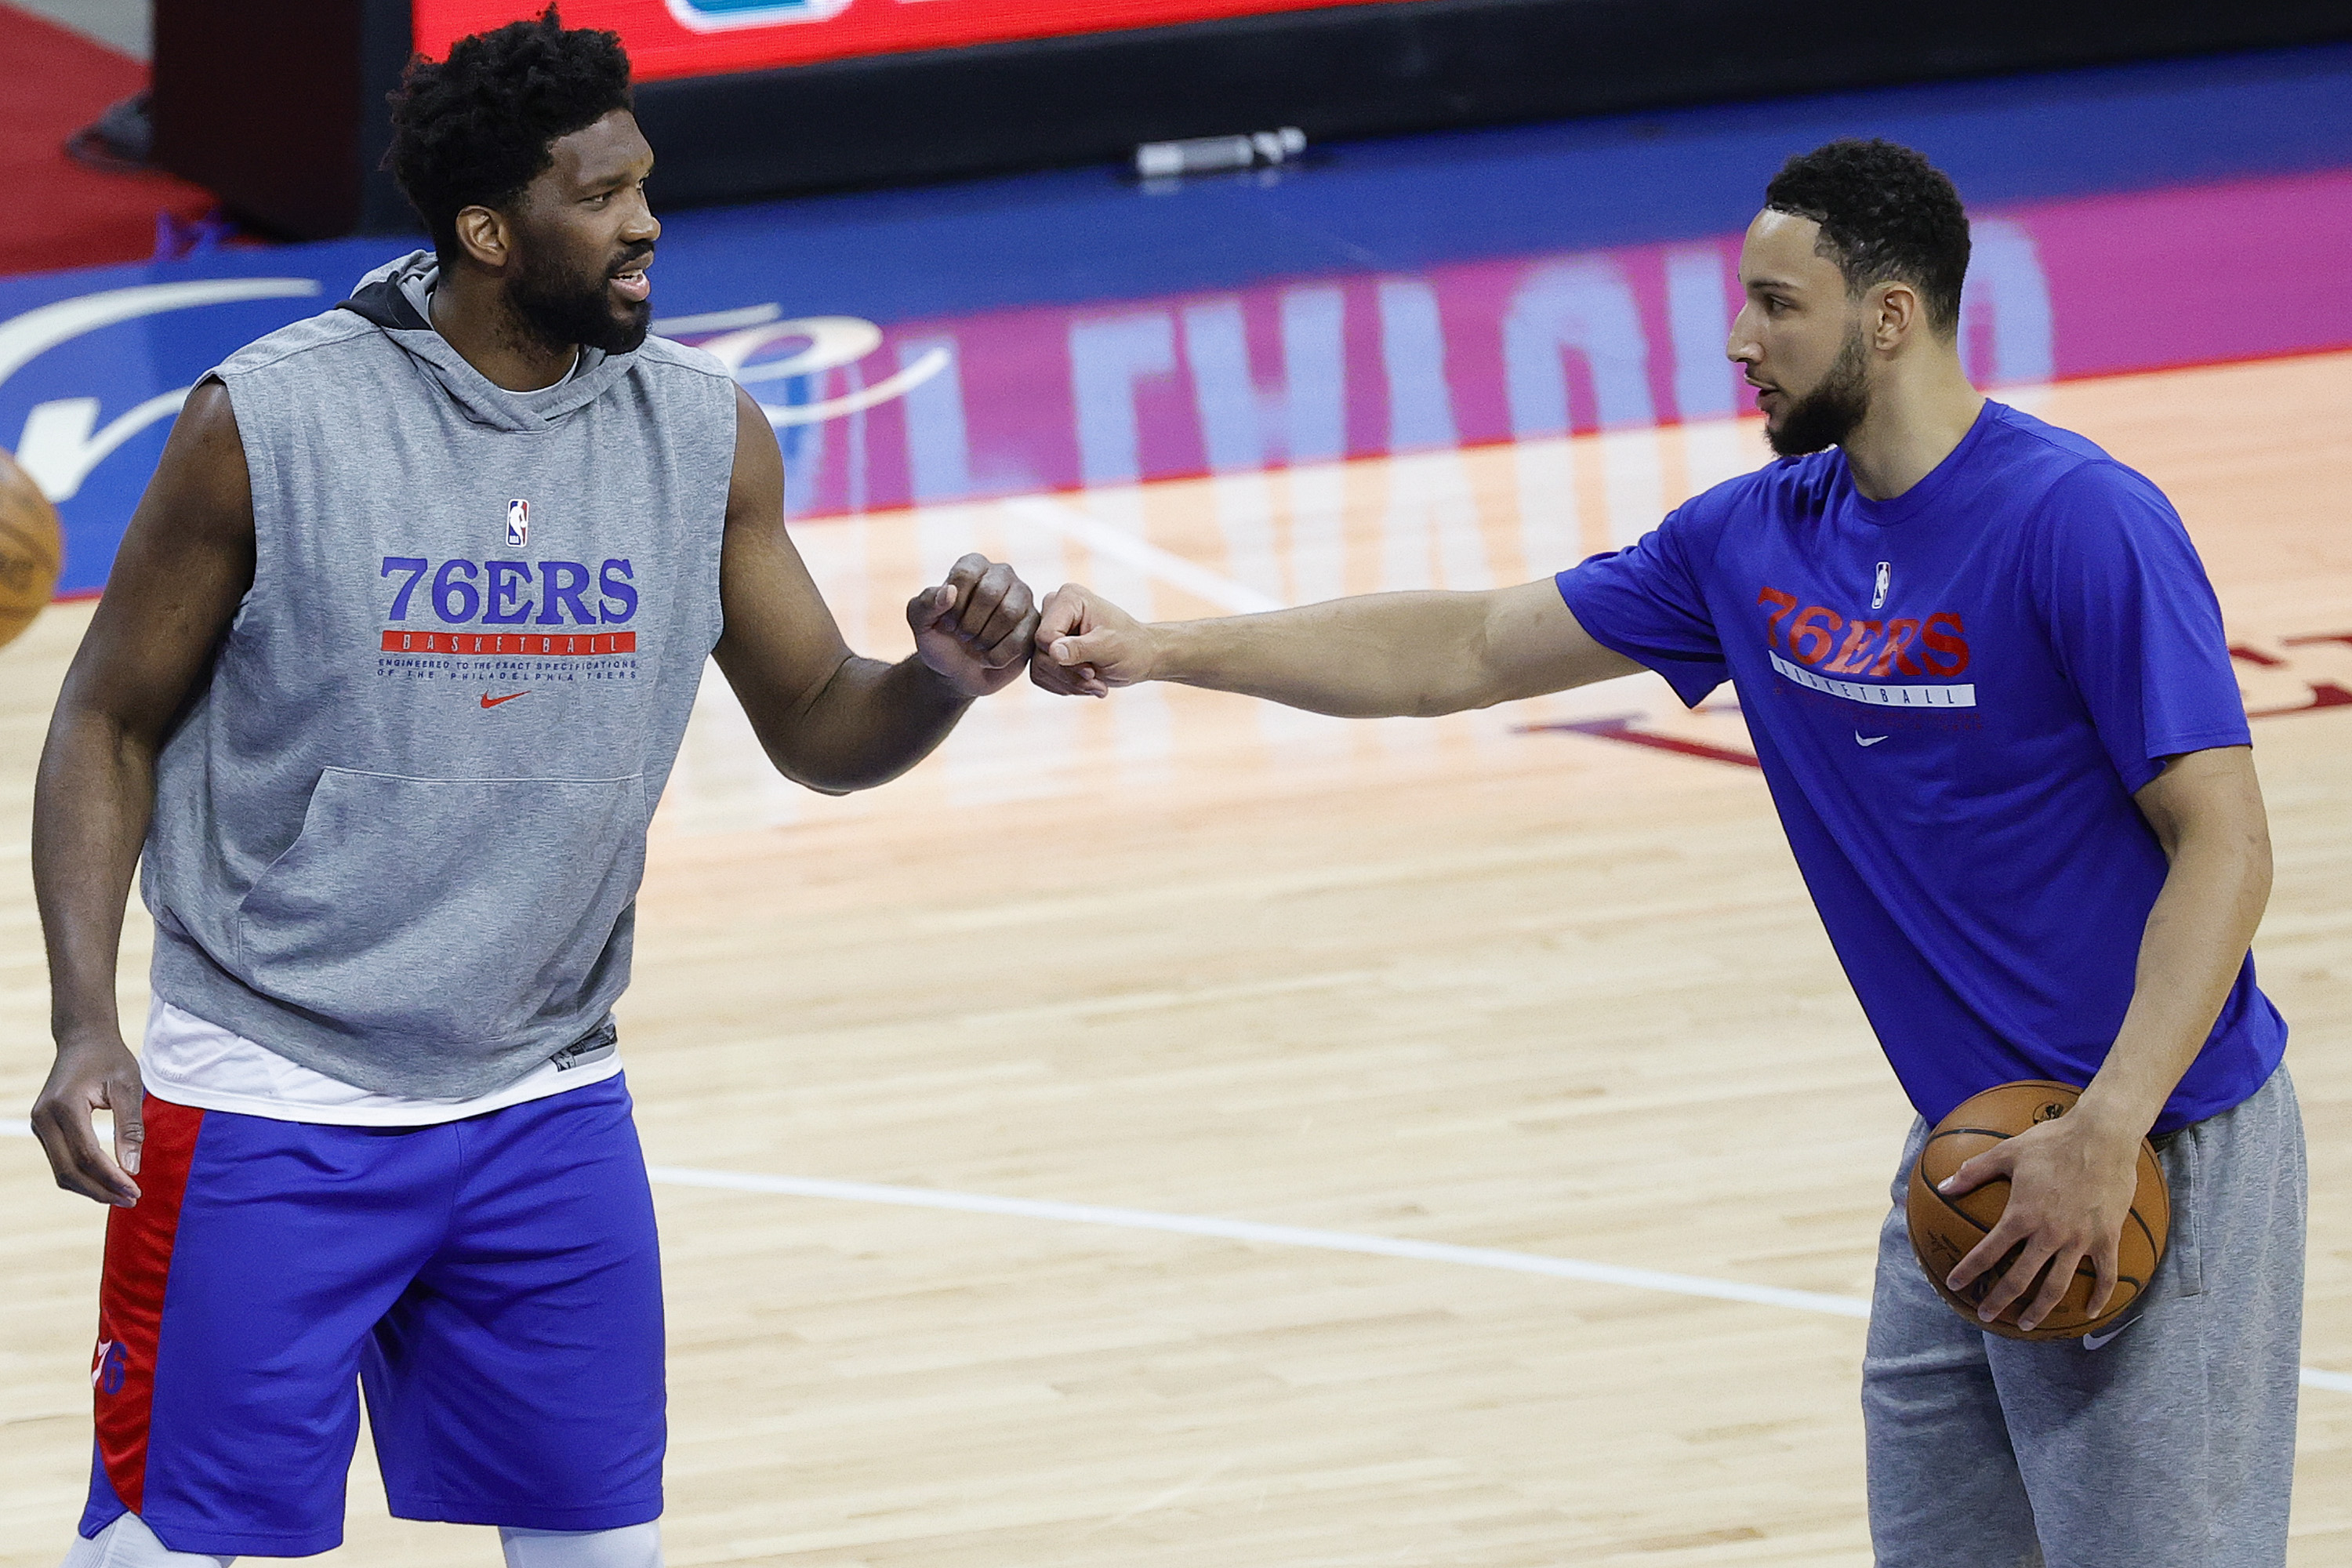 76ers stars Joel Embiid and Ben Simmons dap up before a playoff game